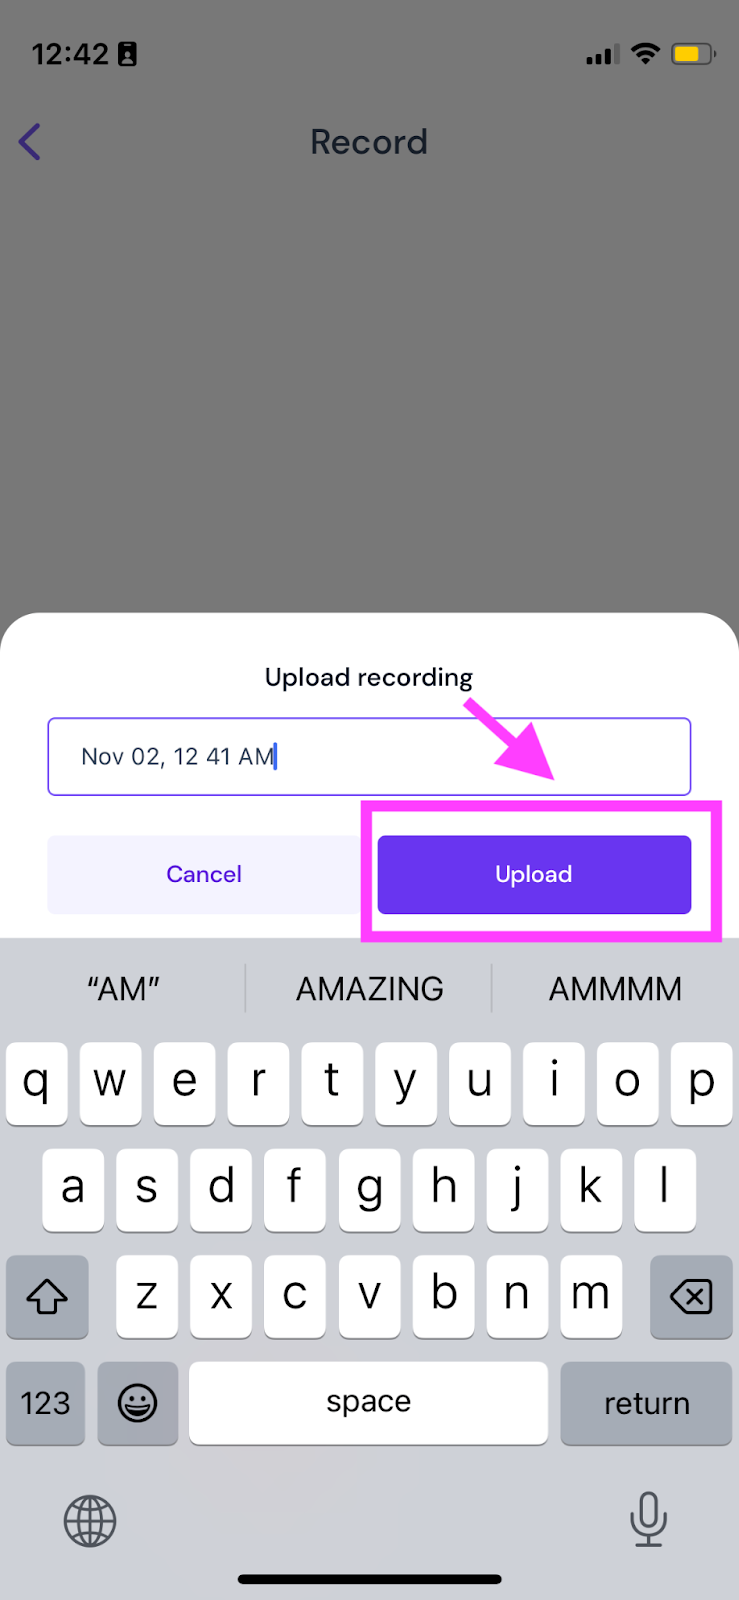 How to record a voice note on iPhone - Upload audio in Fireflies mobile app